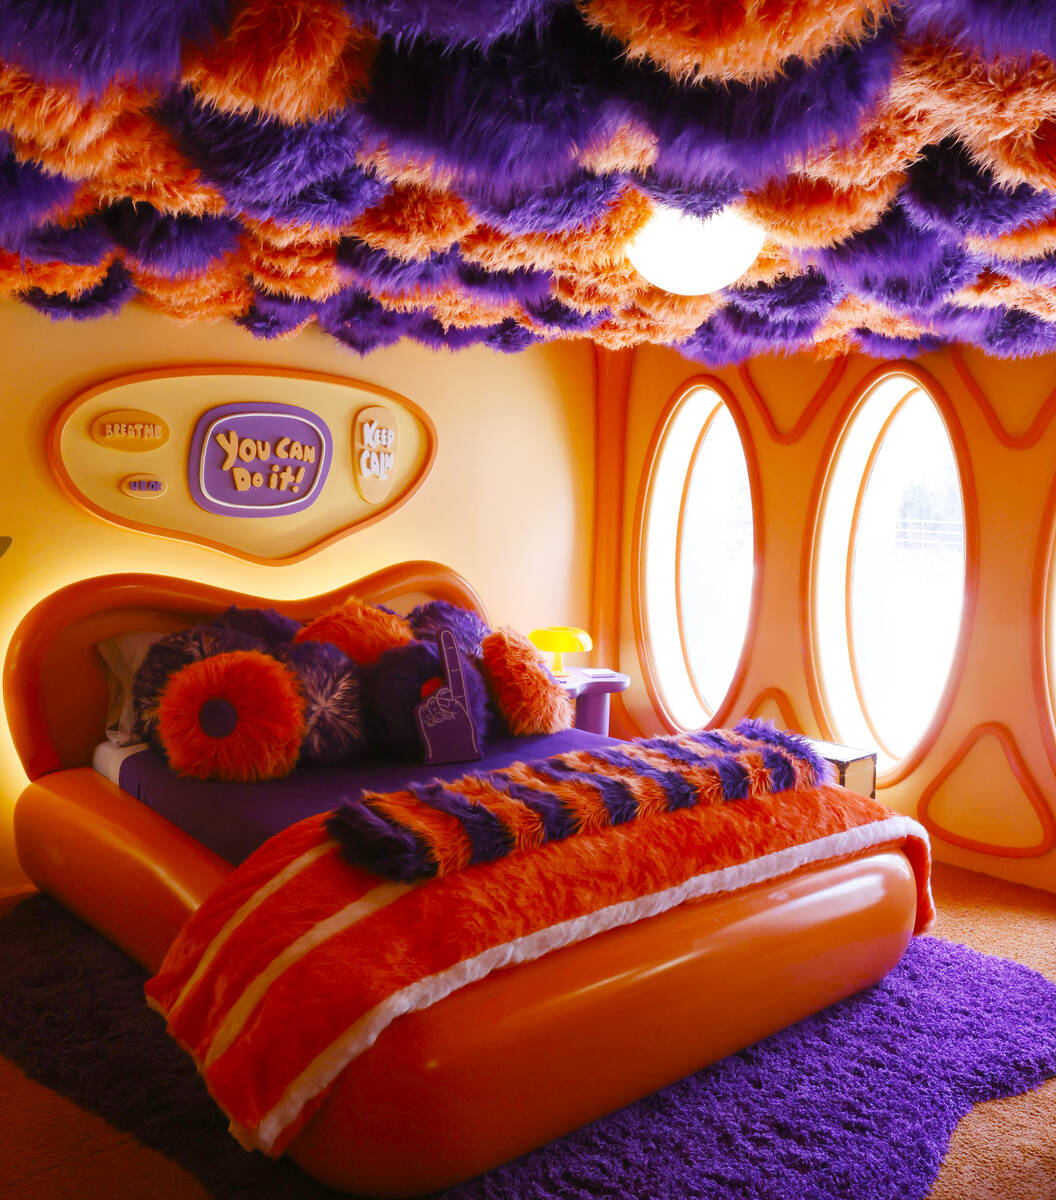 The Anxiety bedroom, inside an "Inside Out 2"-themed property with rooms inspired by ...